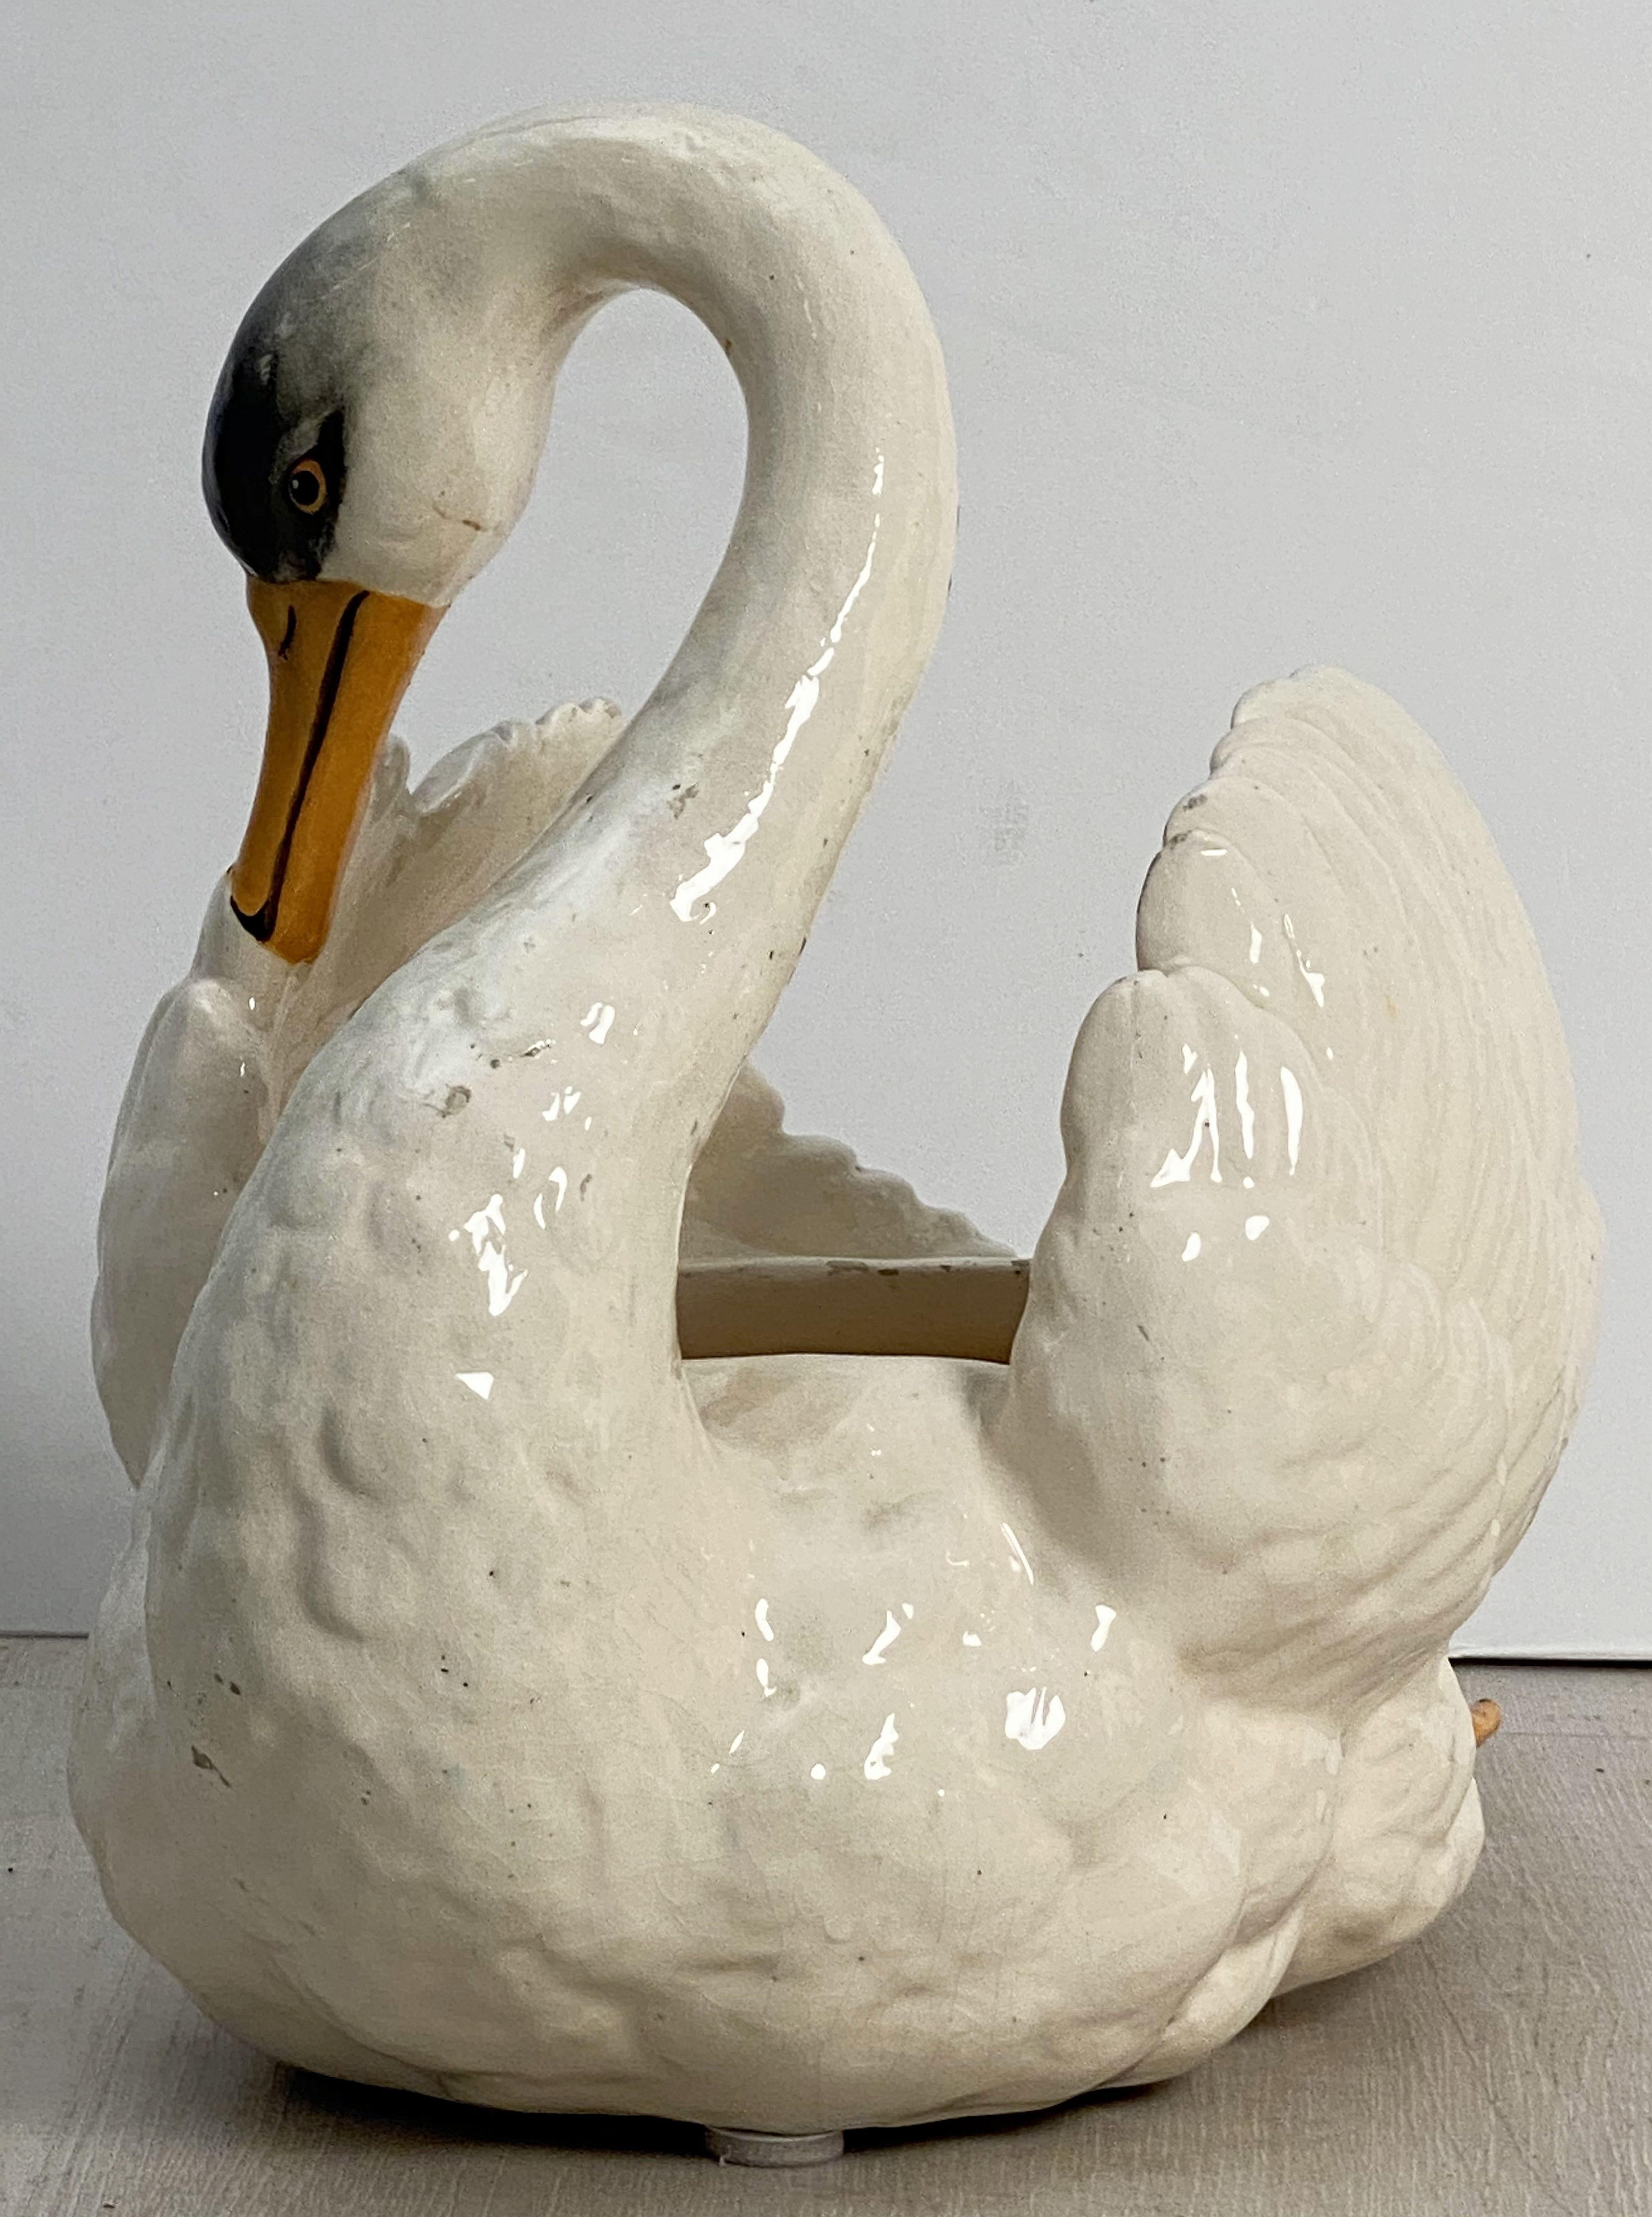 A fine French Majolica large swan planter by the celebrated Vallauris pottery firm, Massier, featuring an elegantly modeled swan in white with hand painted accents.